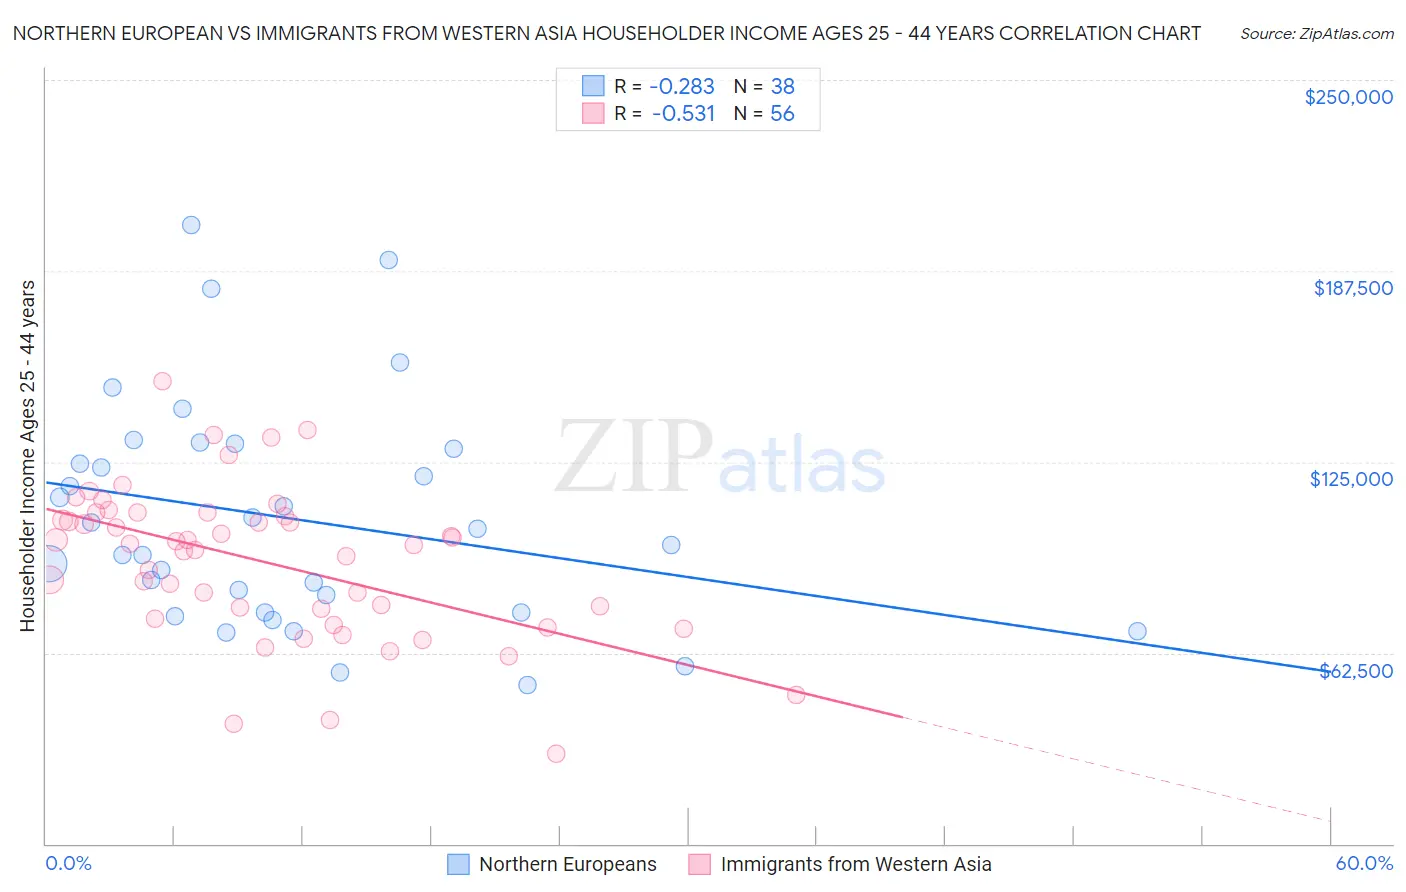 Northern European vs Immigrants from Western Asia Householder Income Ages 25 - 44 years